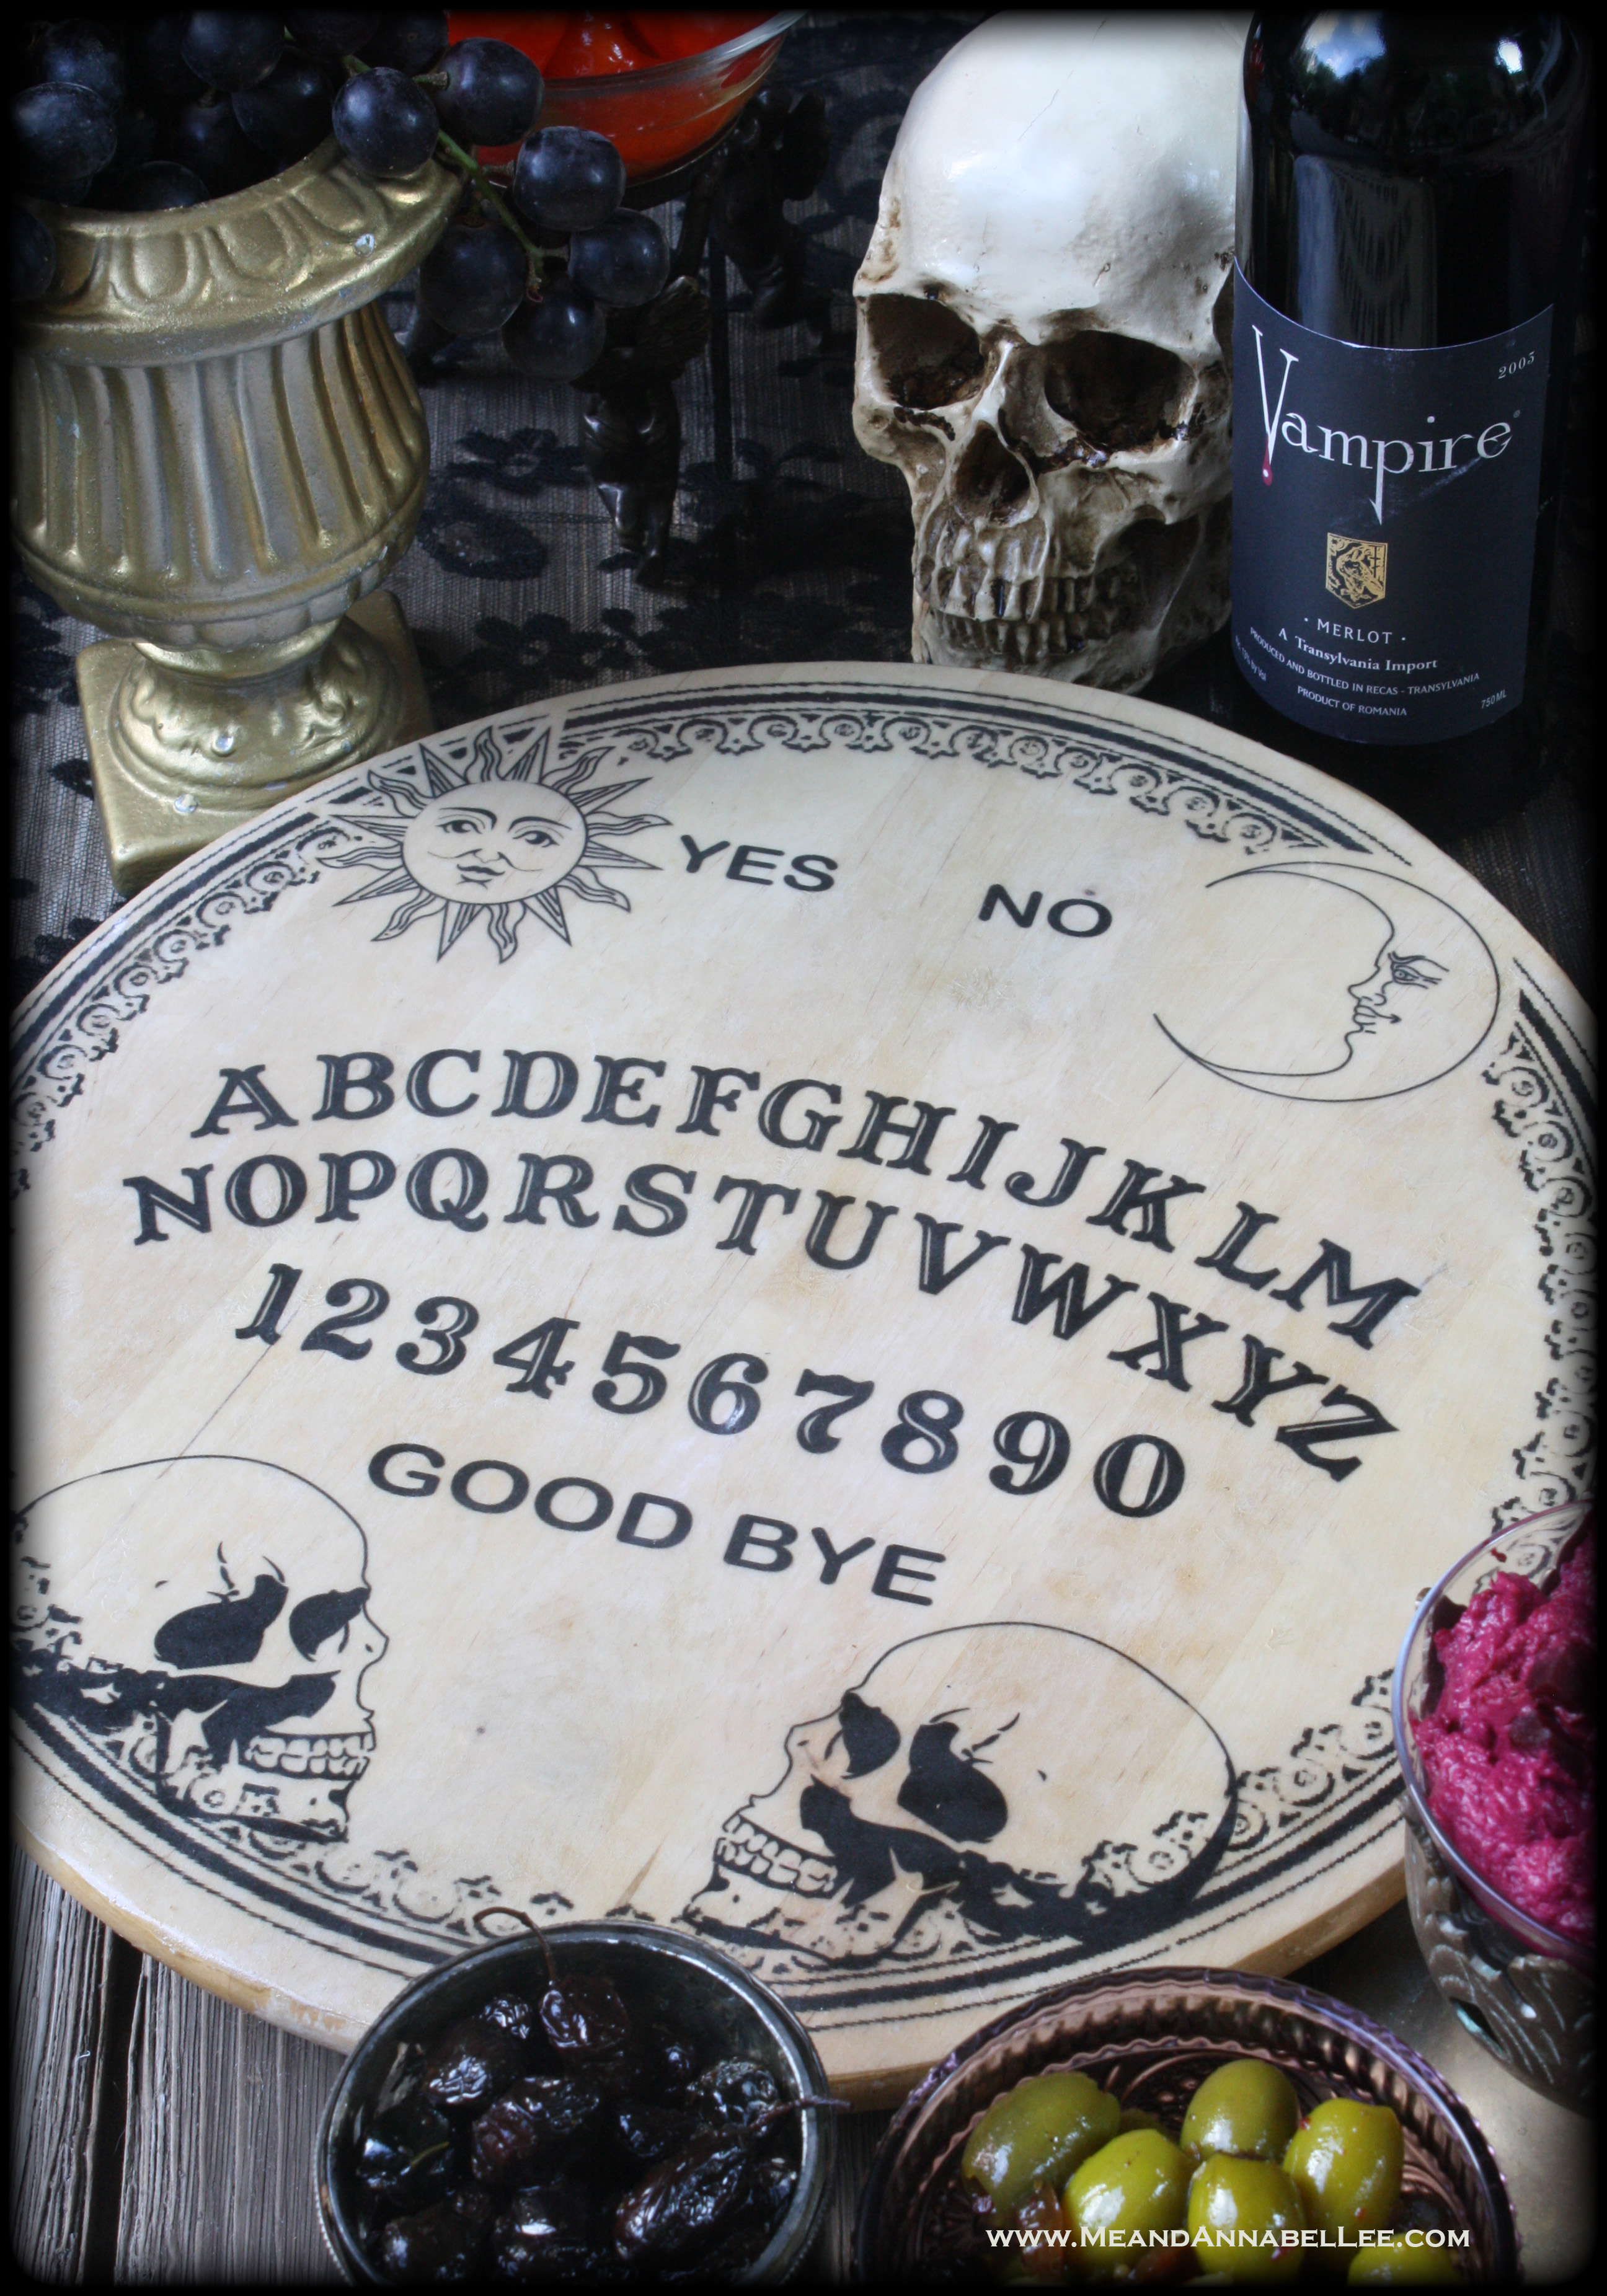 Ouija Board Lazy Susan | Transfer an Image to Wood | Skull Image | Halloween Crafts | www.MeandAnnabelLee.com